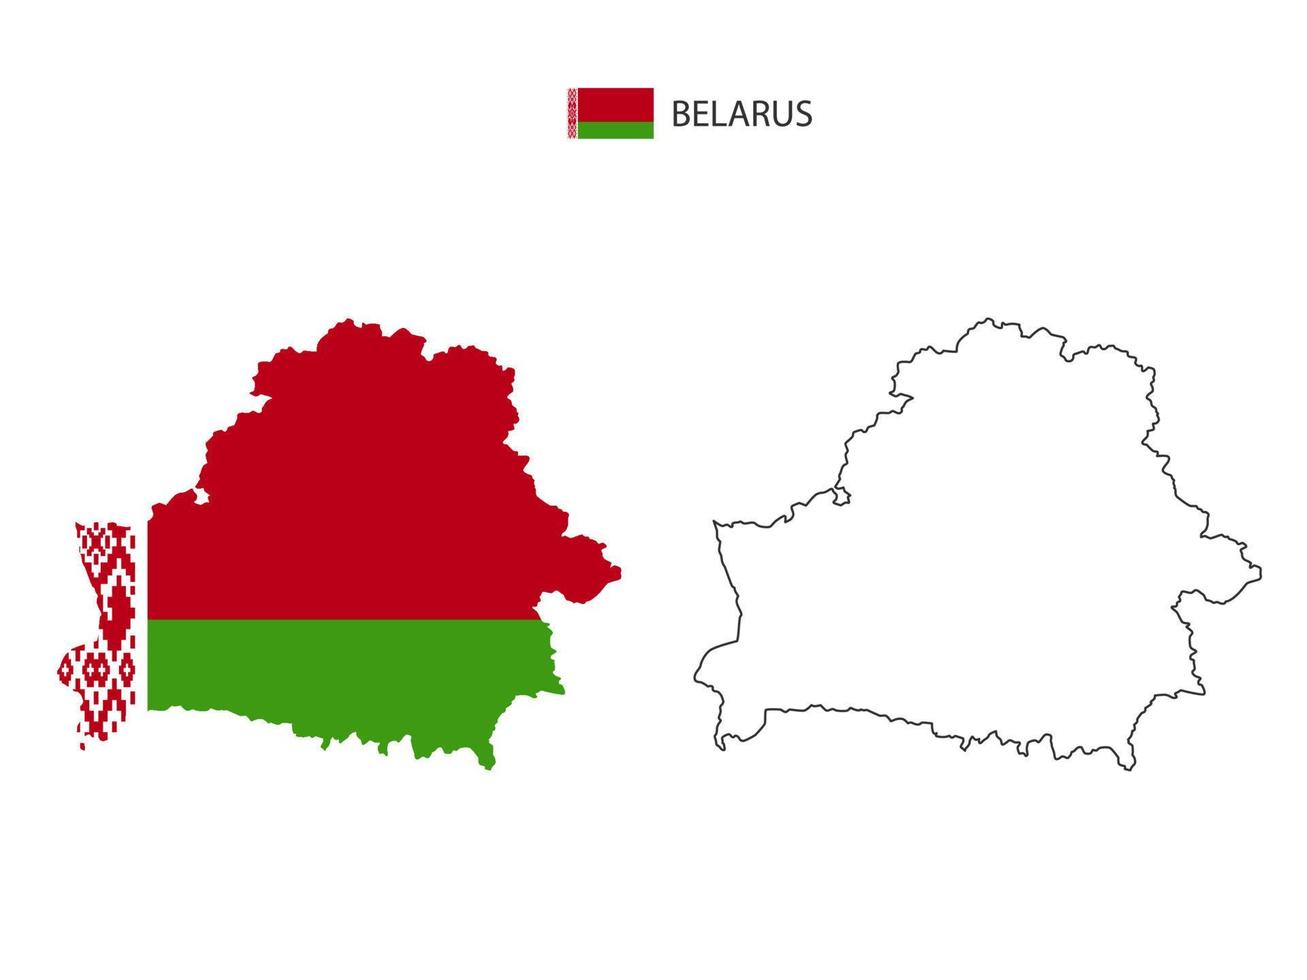 Belarus map city vector divided by outline simplicity style. Have 2 versions, black thin line version and color of country flag version. Both map were on the white background.